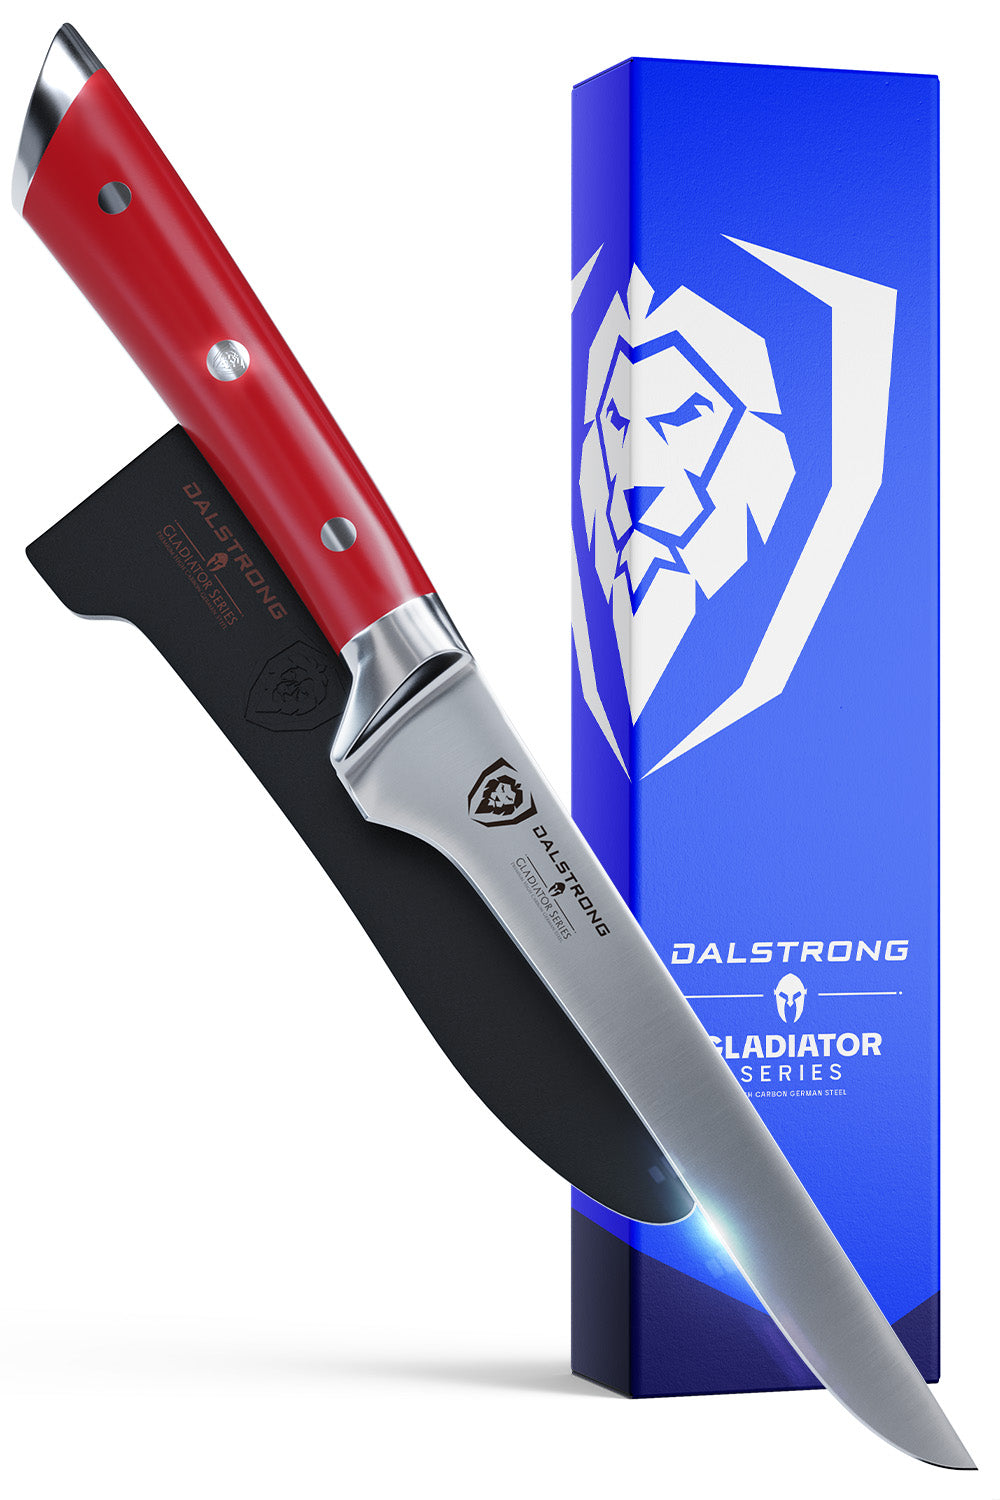 Boning Knife 6" | Crimson Red ABS Handle | Gladiator Series | NSF Certified | Dalstrong ©